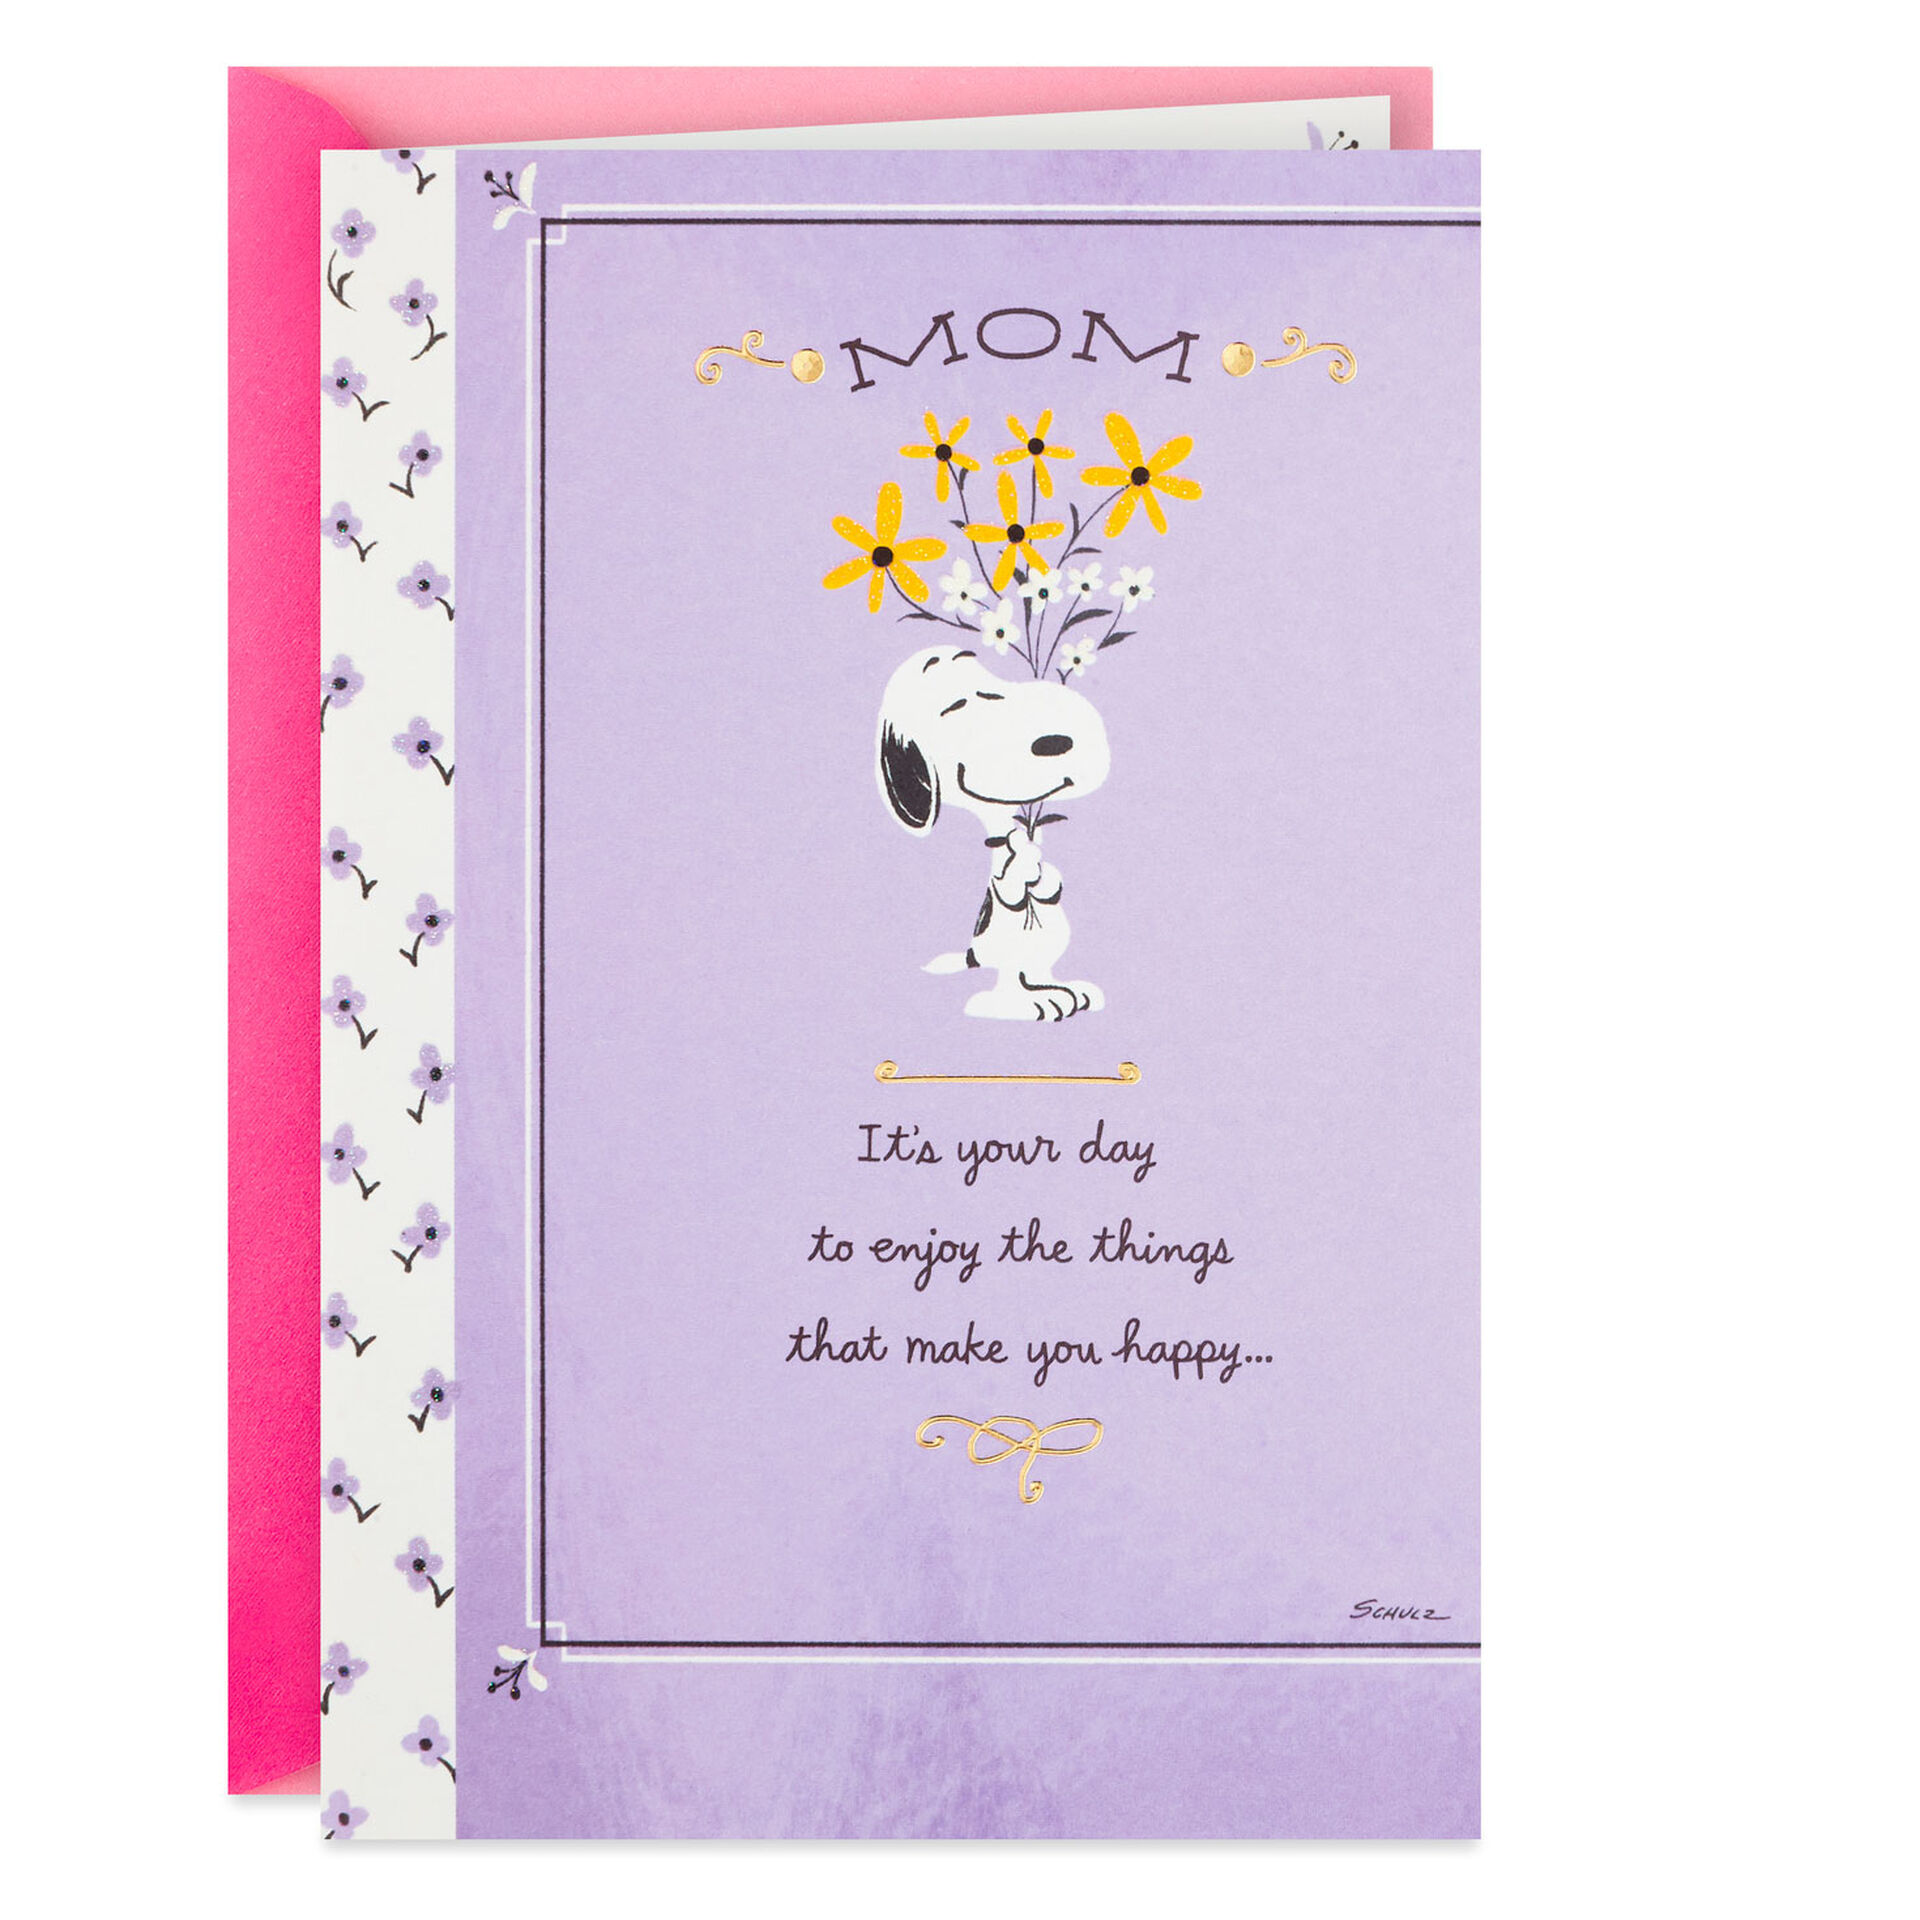 Snoopy-With-Bouquet-of-Flowers-Birthday-Card-for-Mom_459FBD9313_01